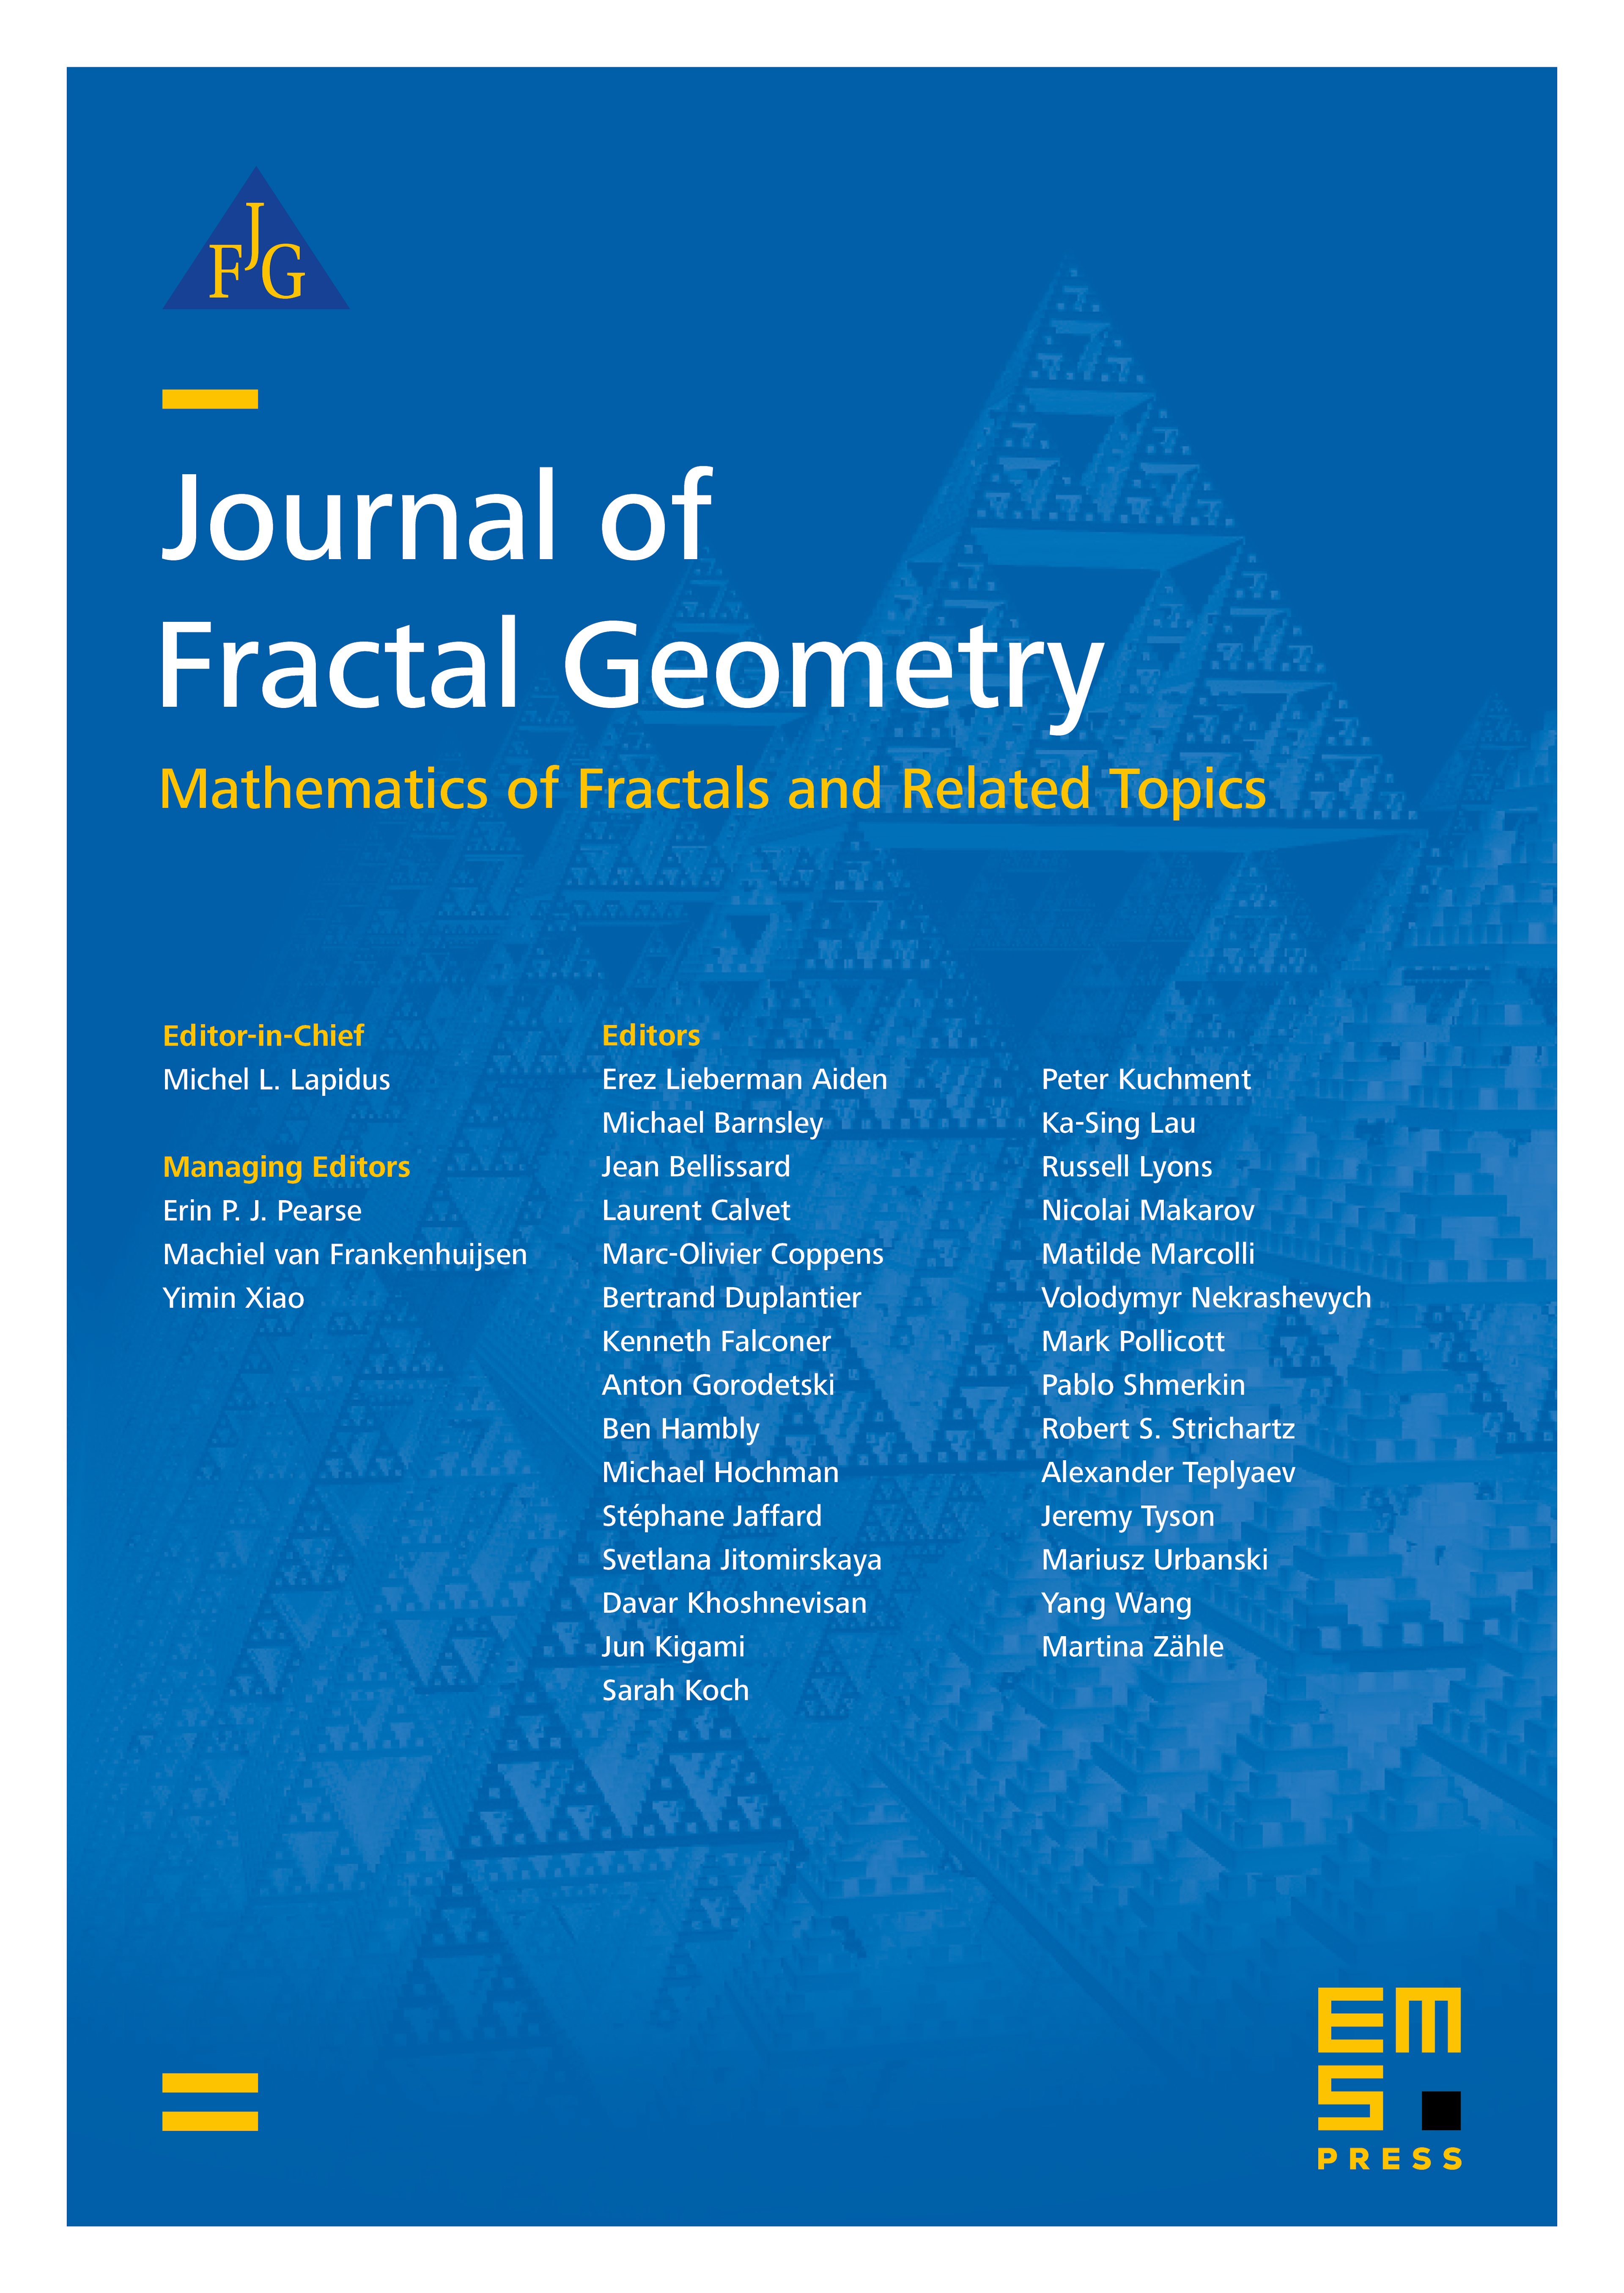 Orthogonal projections of discretized sets cover